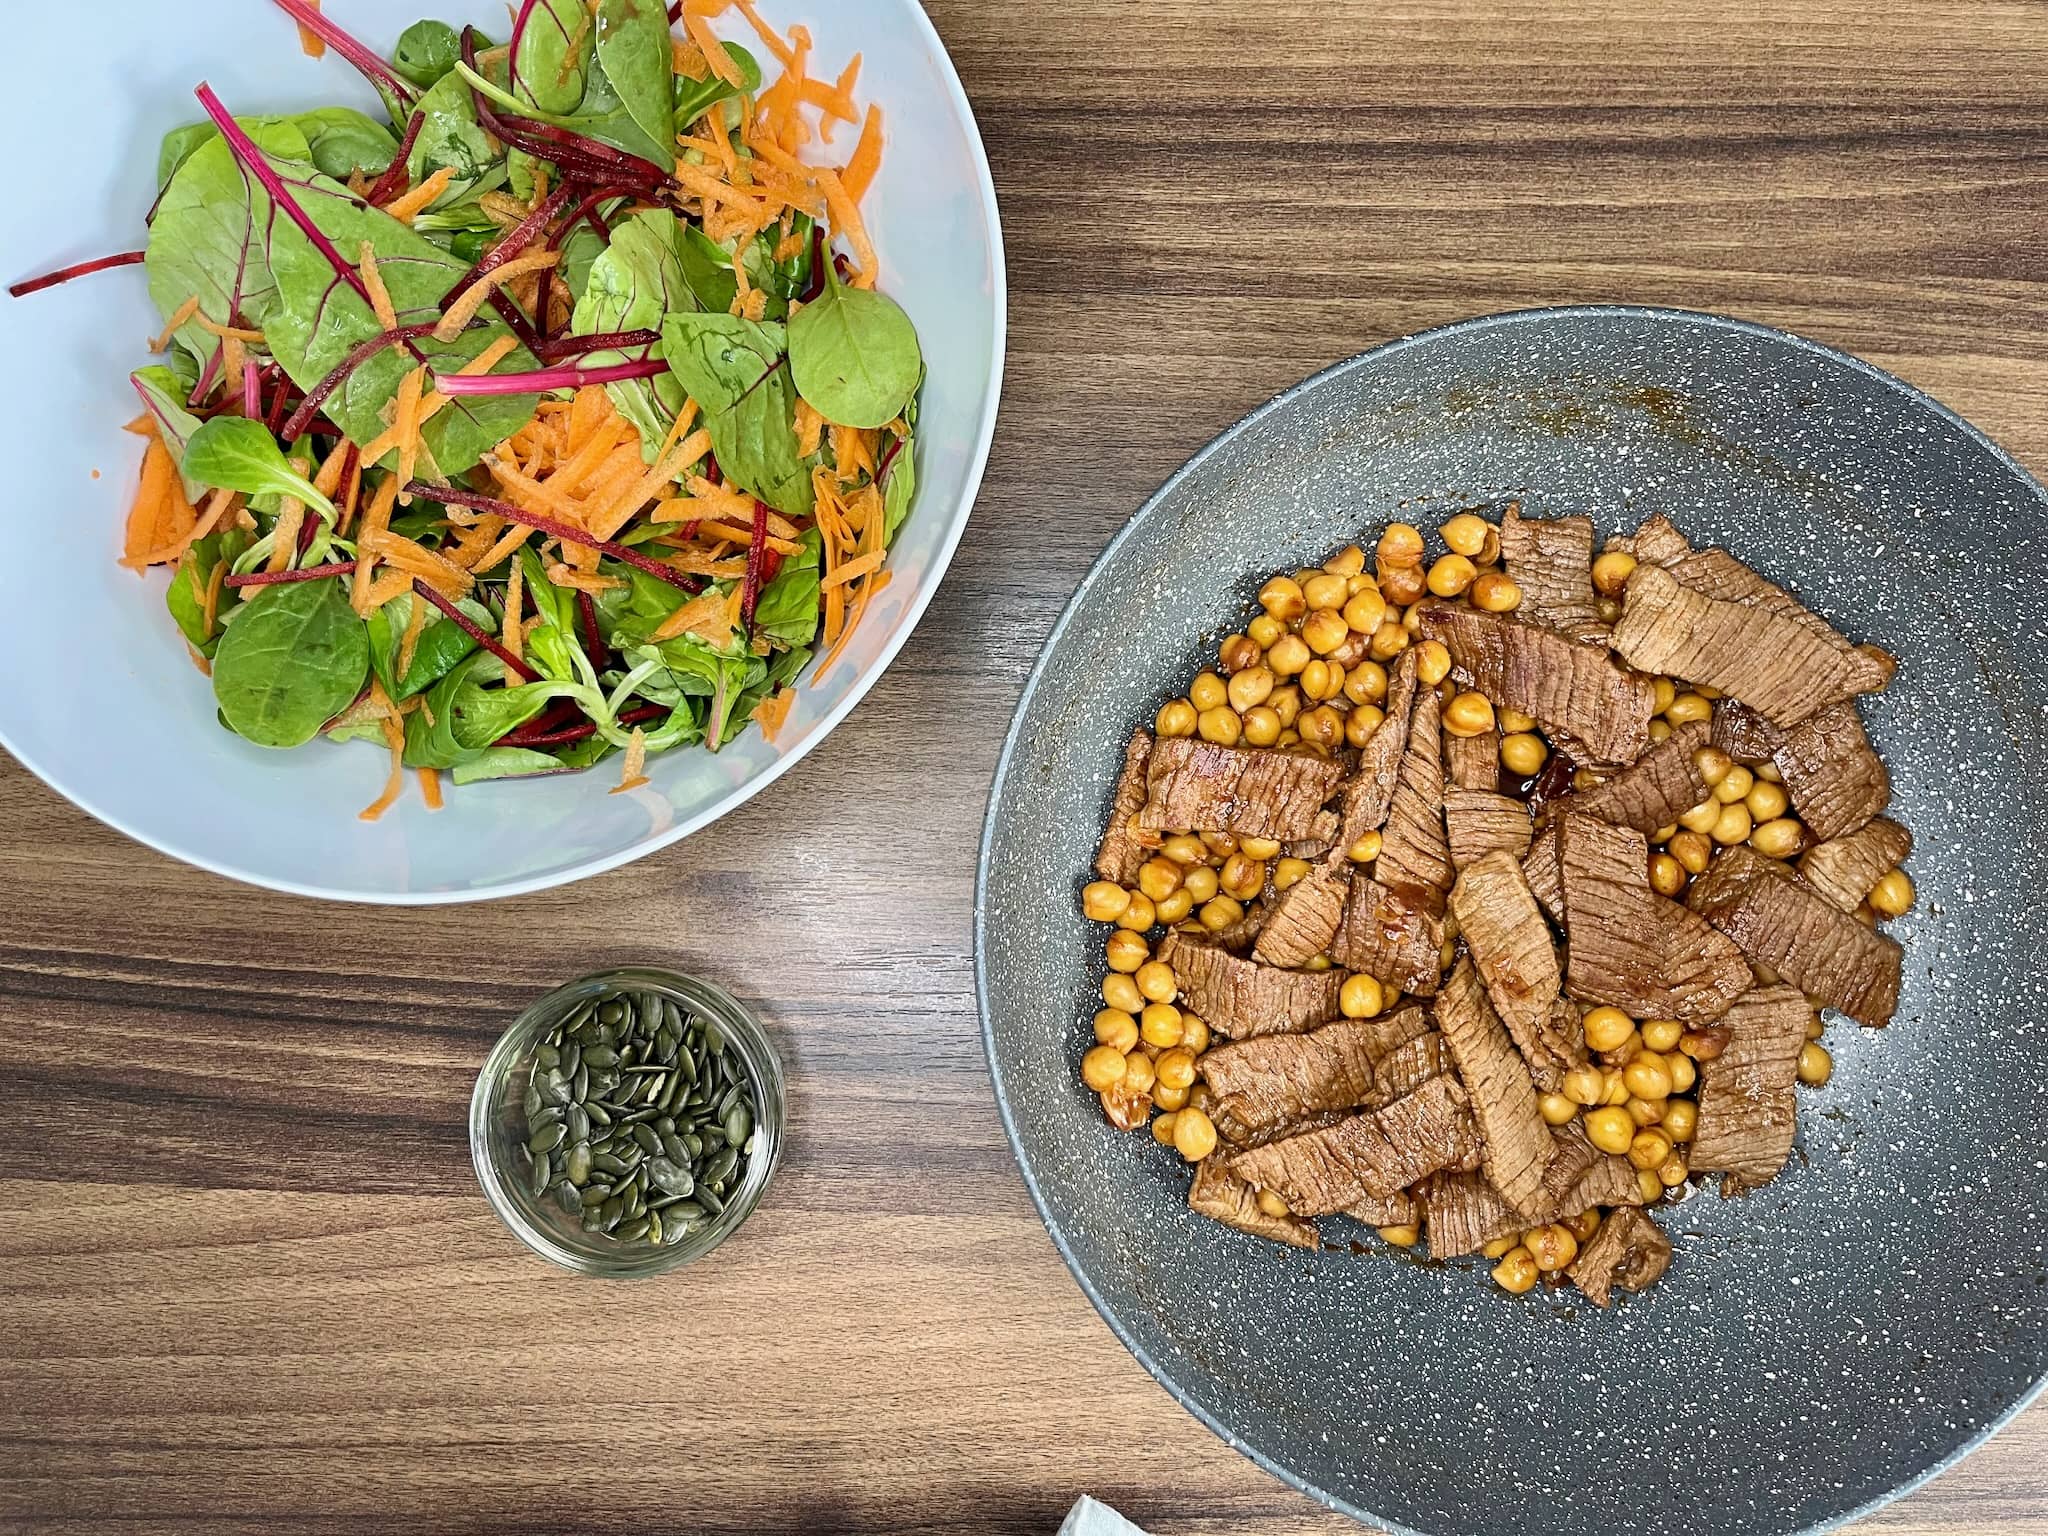 A bowl of mixed salad with steak meat and chickpeas on the side, and a small bowl of pumpkin seeds